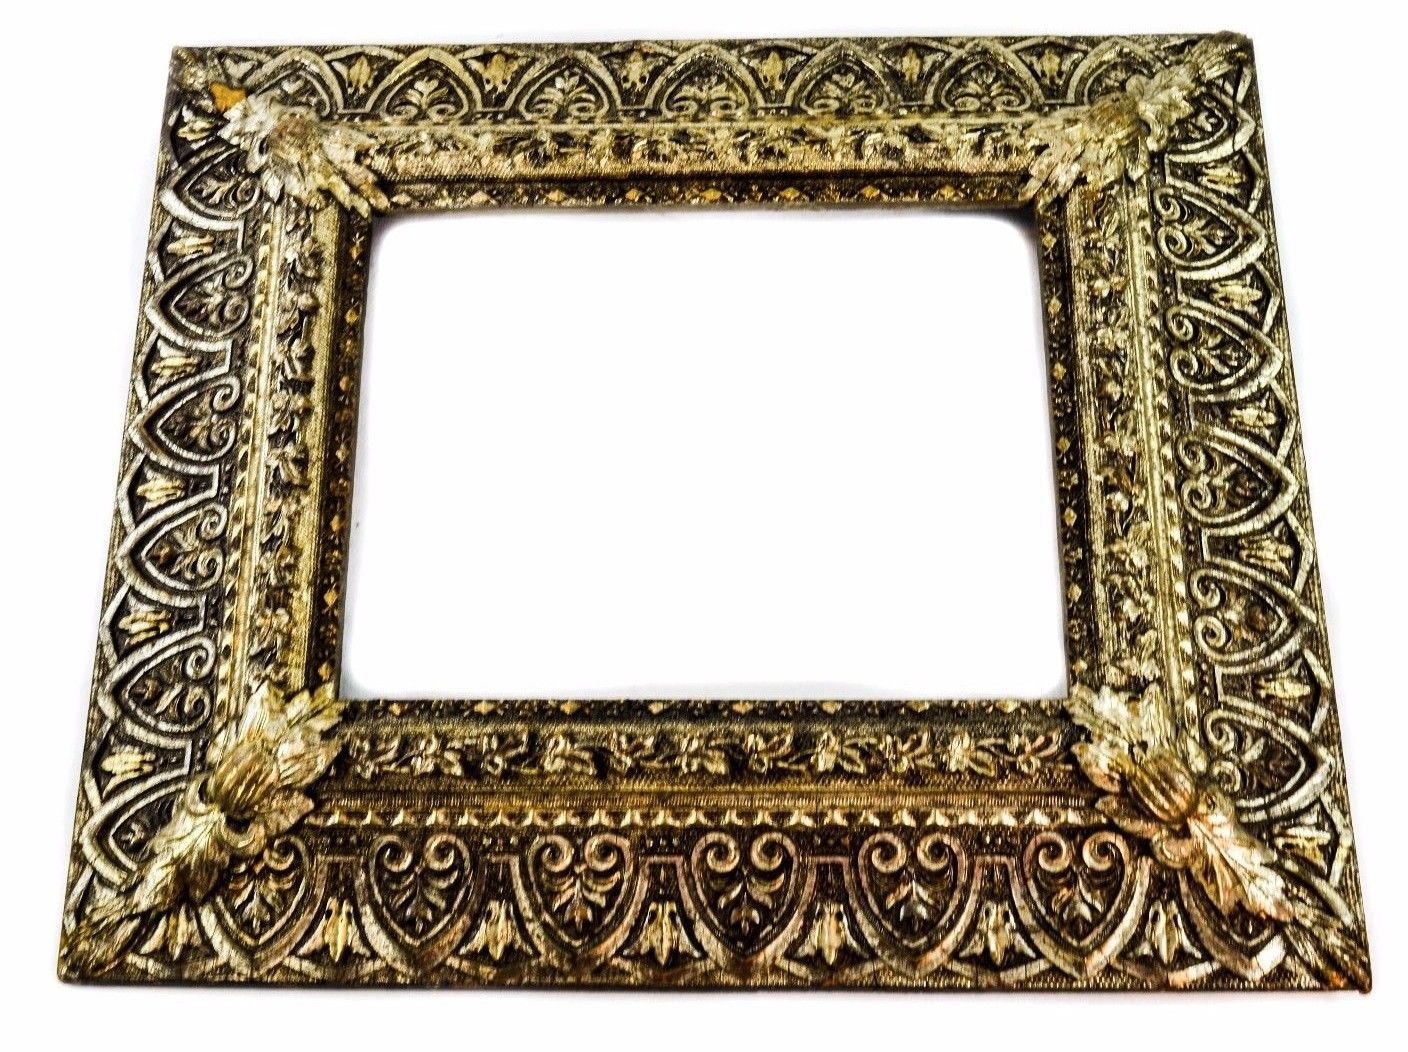 ANTIQUE VICTORIAN ORNATE SILVER & GOLD WOOD AND GESSO LARGE FRAME